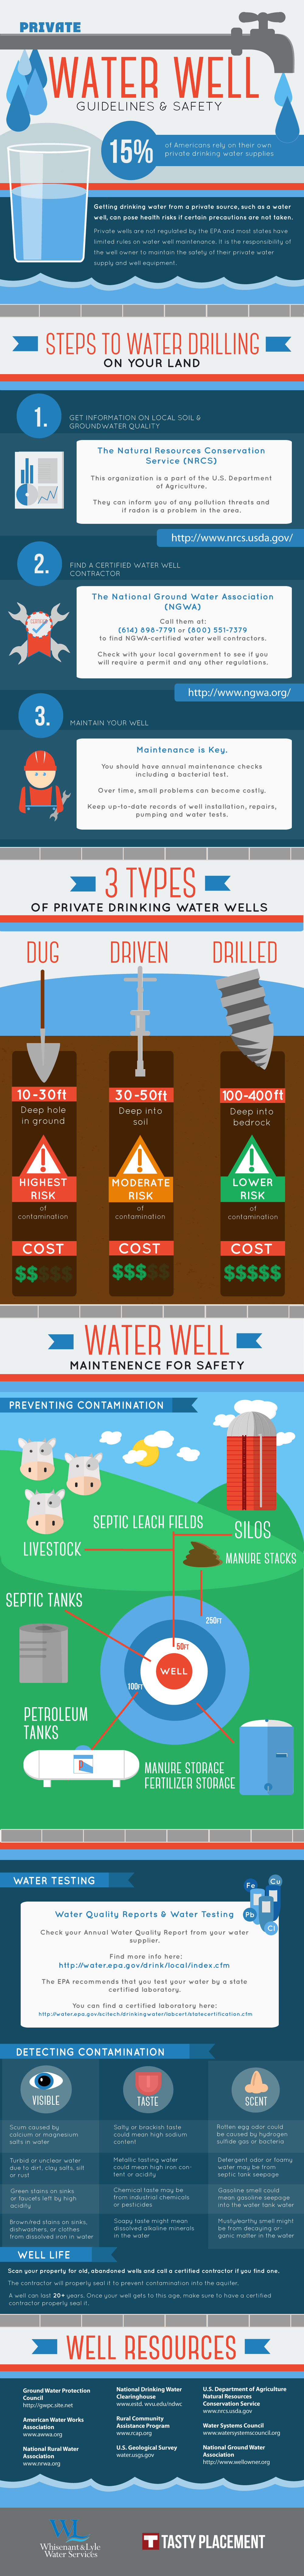 Private Water Well Guidelines & Safety